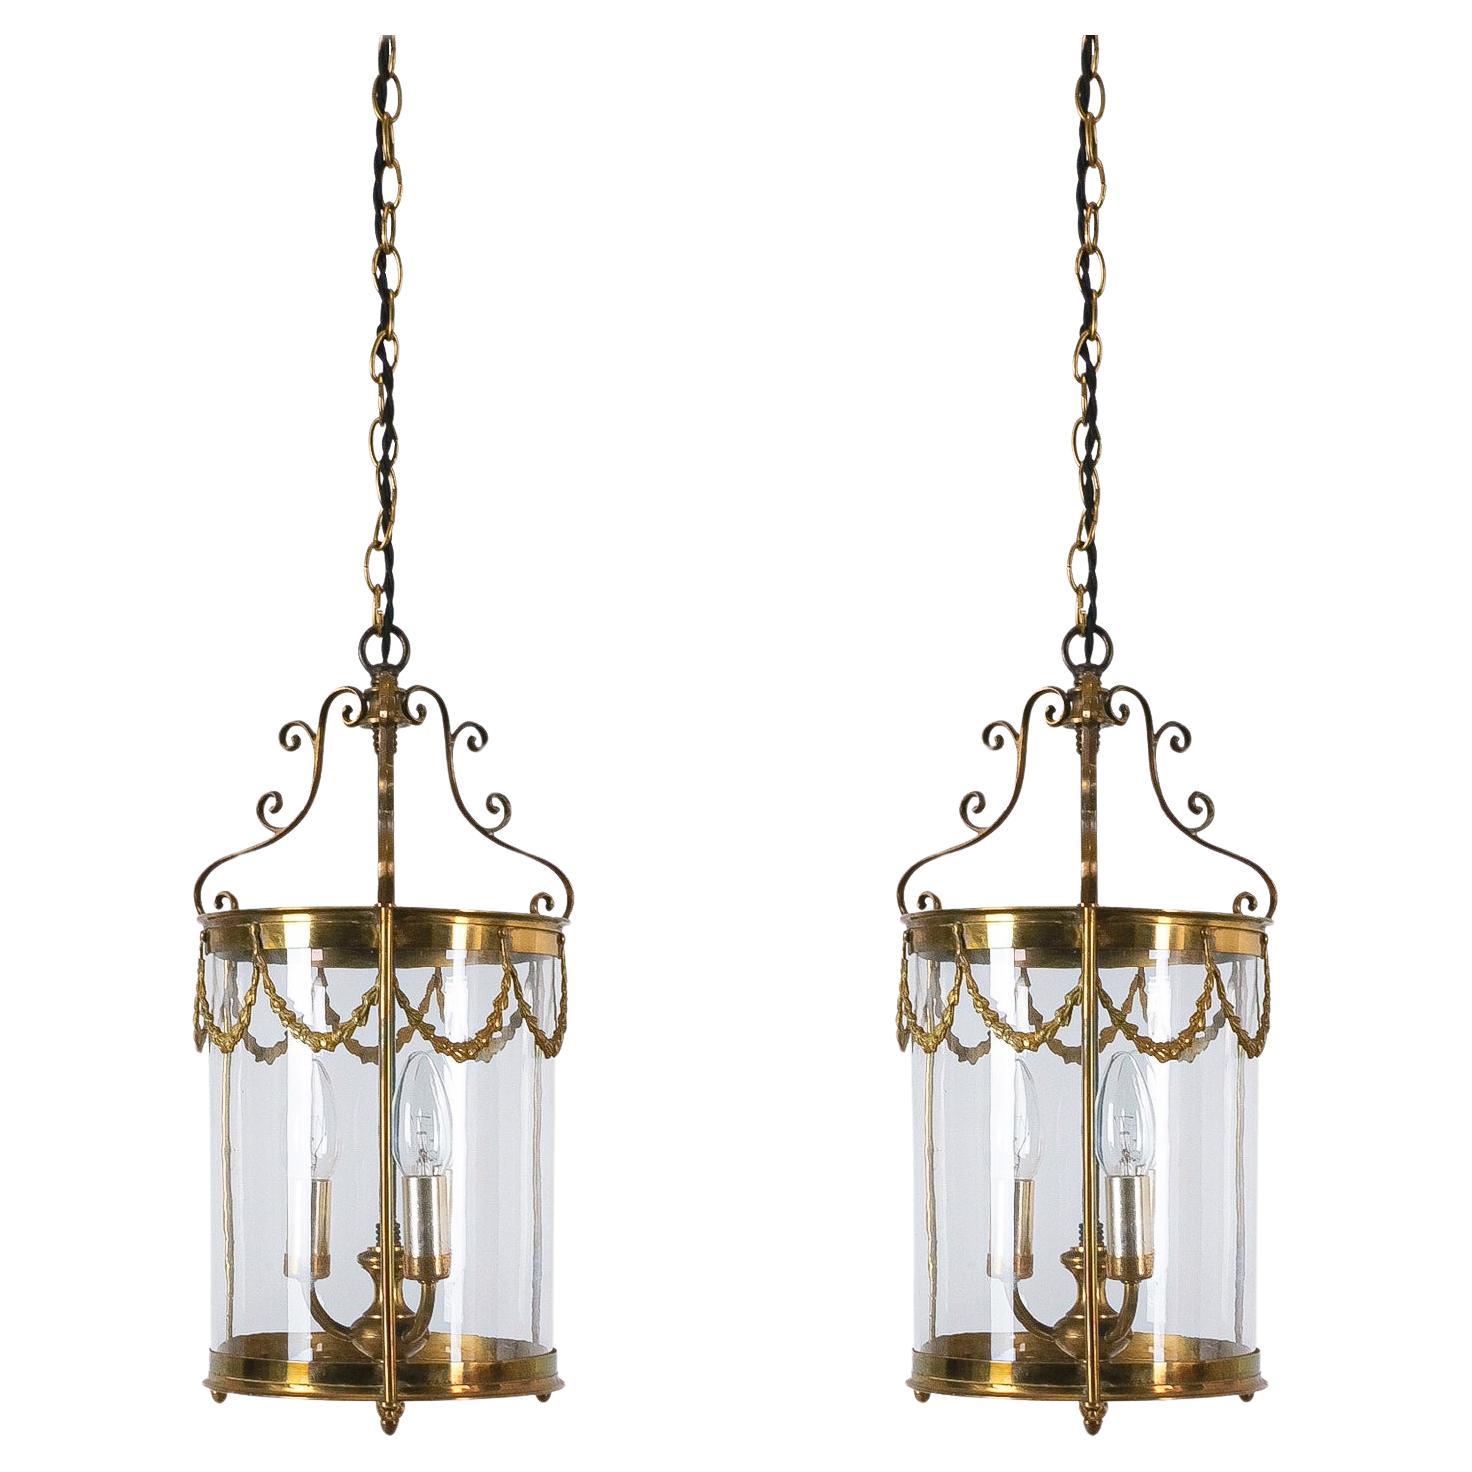 Pair of Neo-Empire Pendant Lights from Glass and Brass, France 1950 For Sale